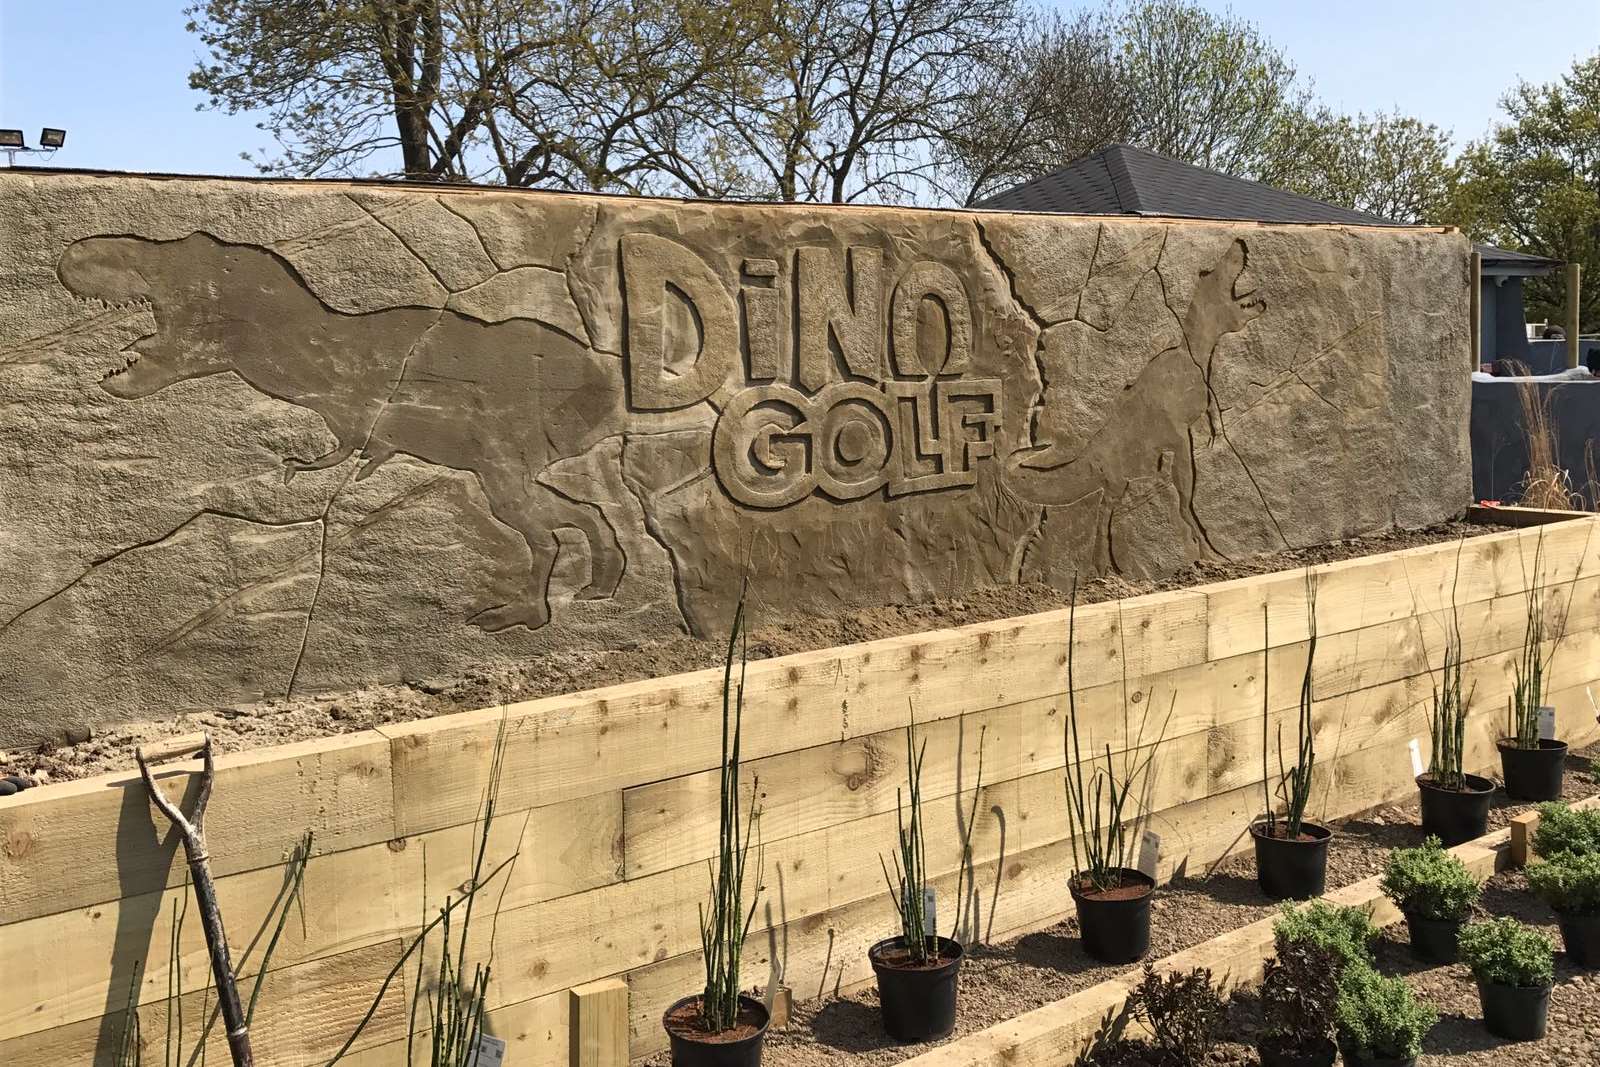 Fancy a fossil-themed 18-holes?